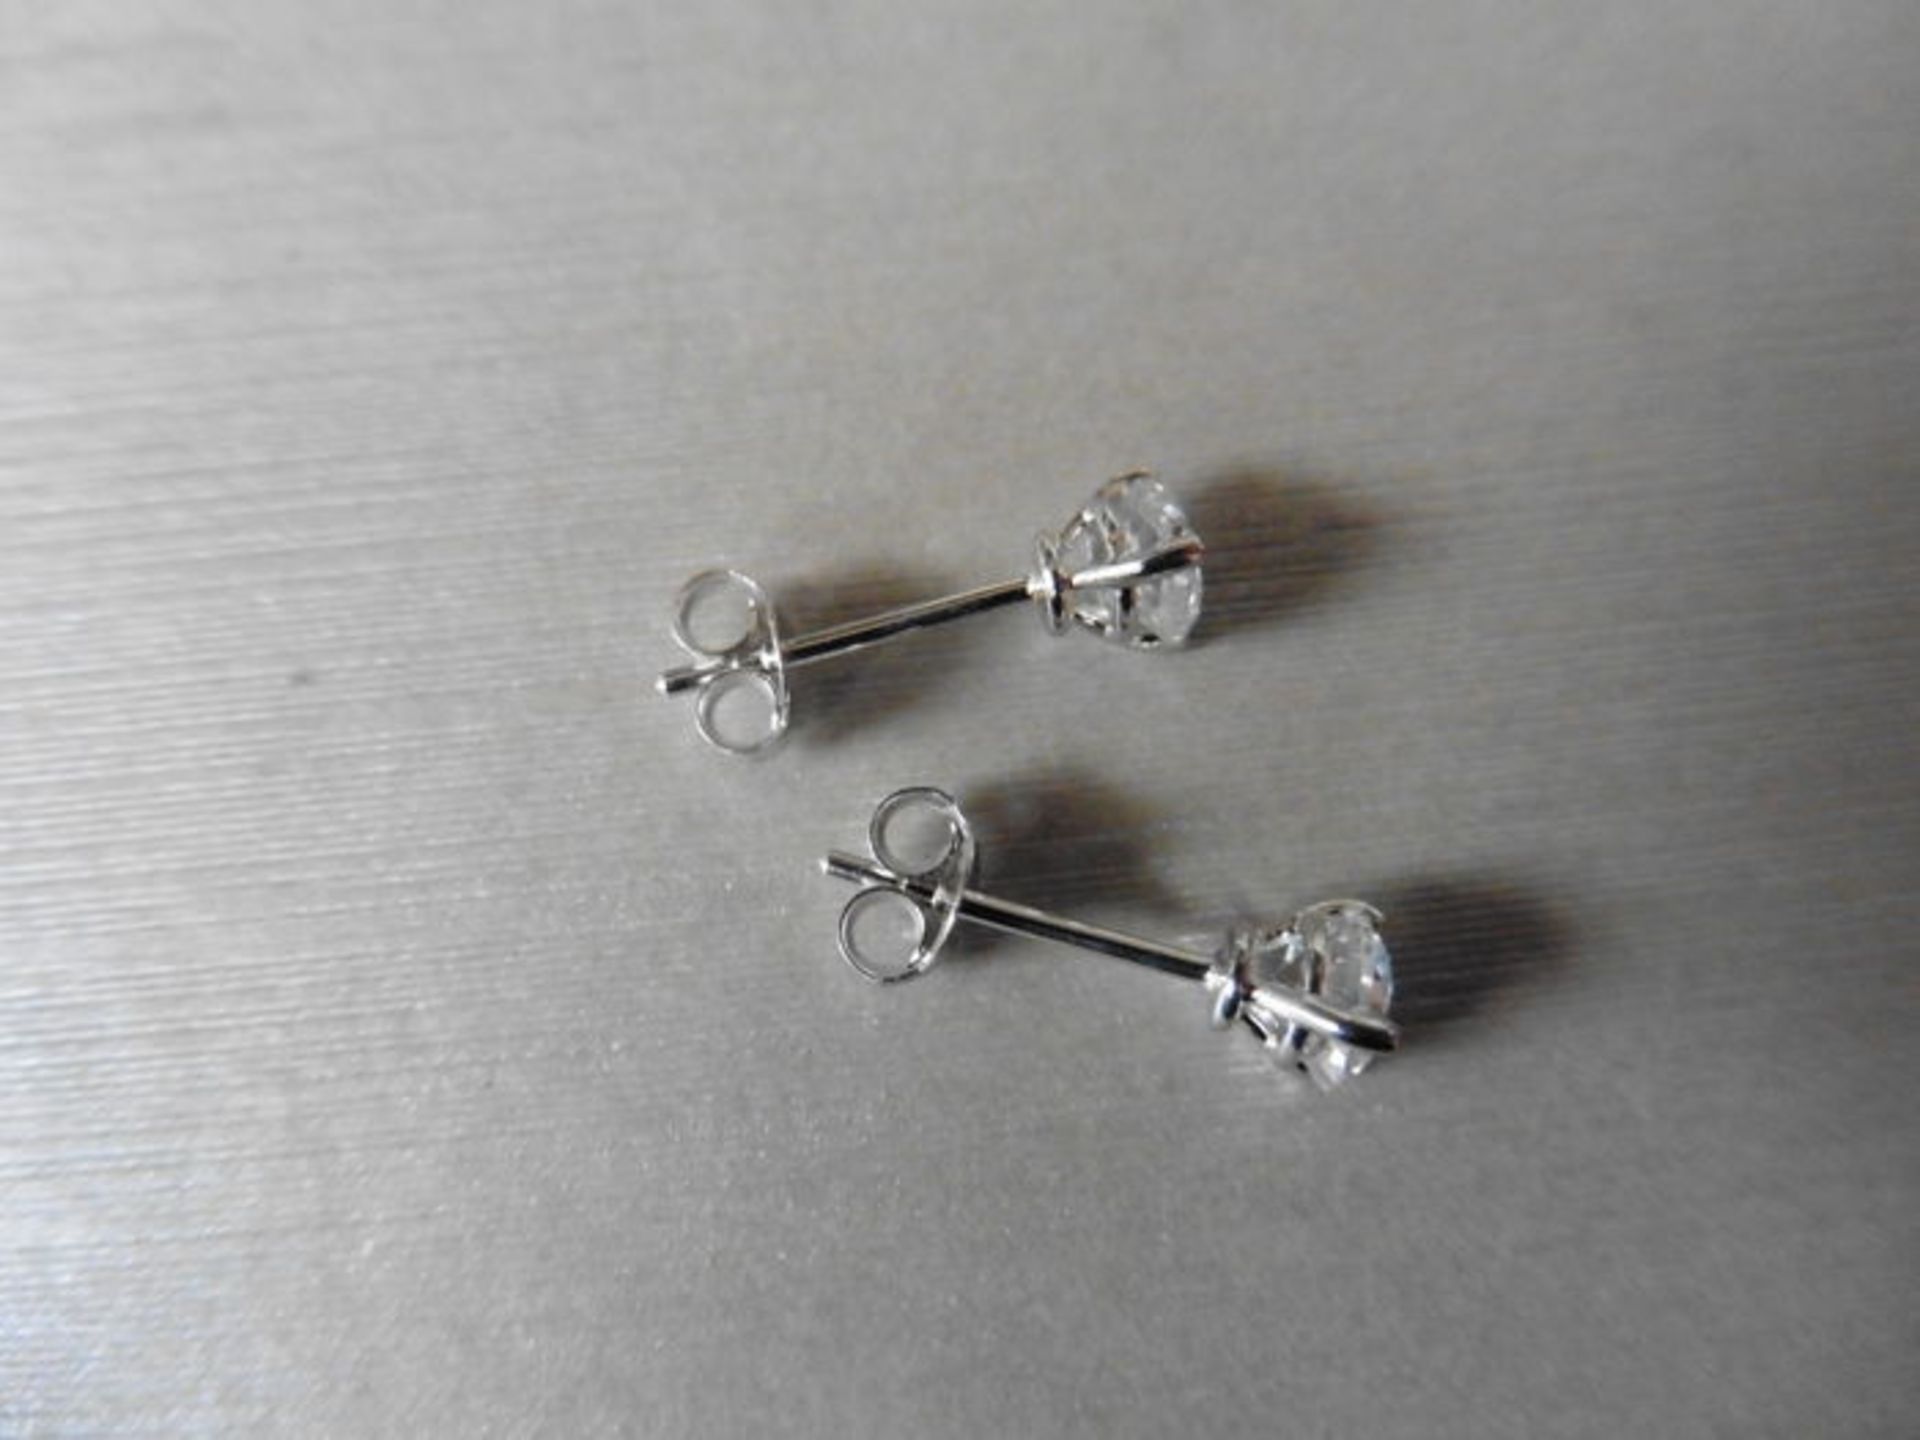 1.40ct diamond solitaire stud earrings set in platinum. 3 claw setting with brilliant cut - Image 2 of 2